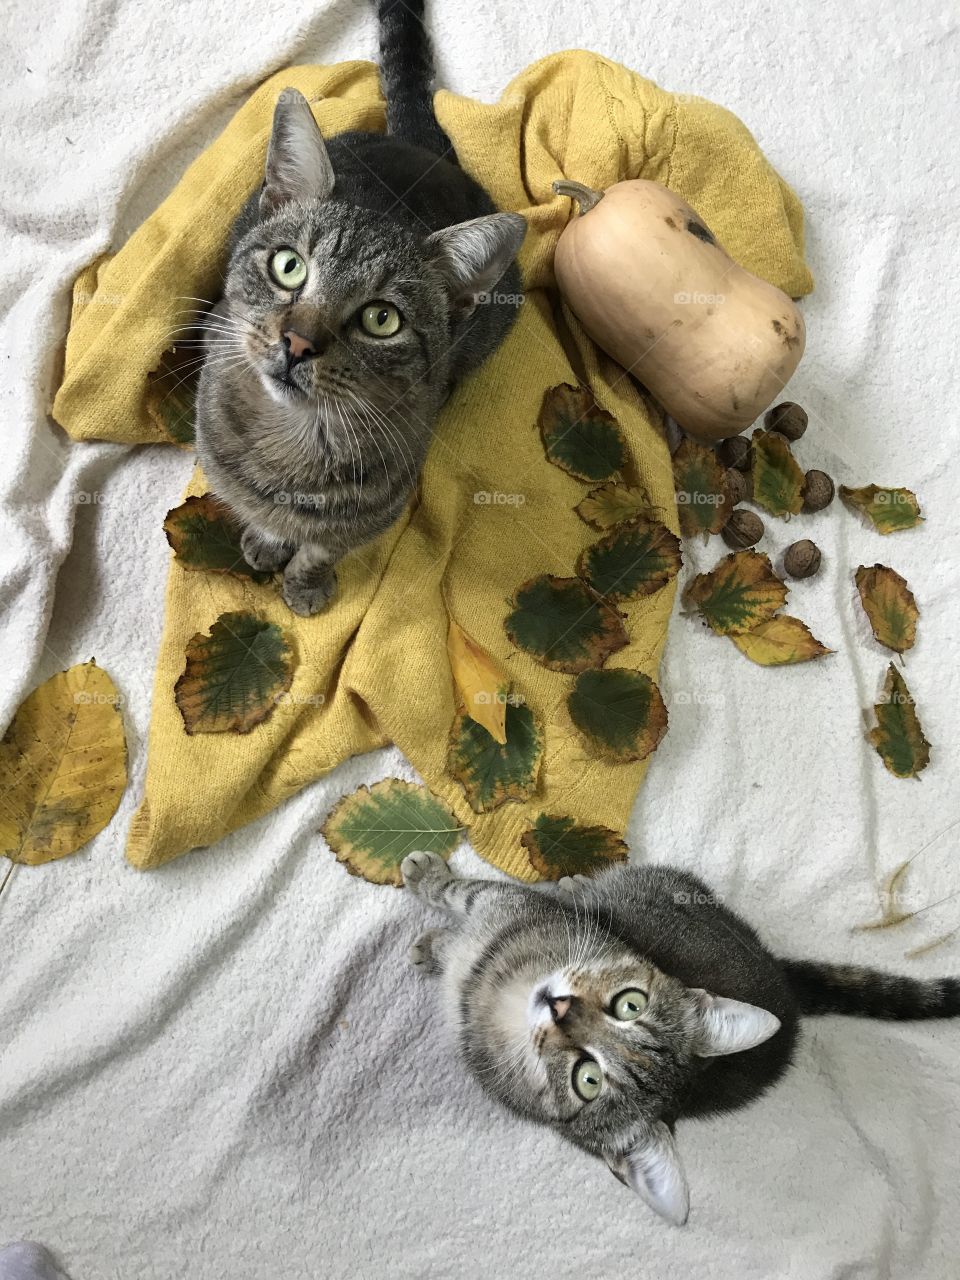 Two cats sitting on a blanket with autumn scenery.